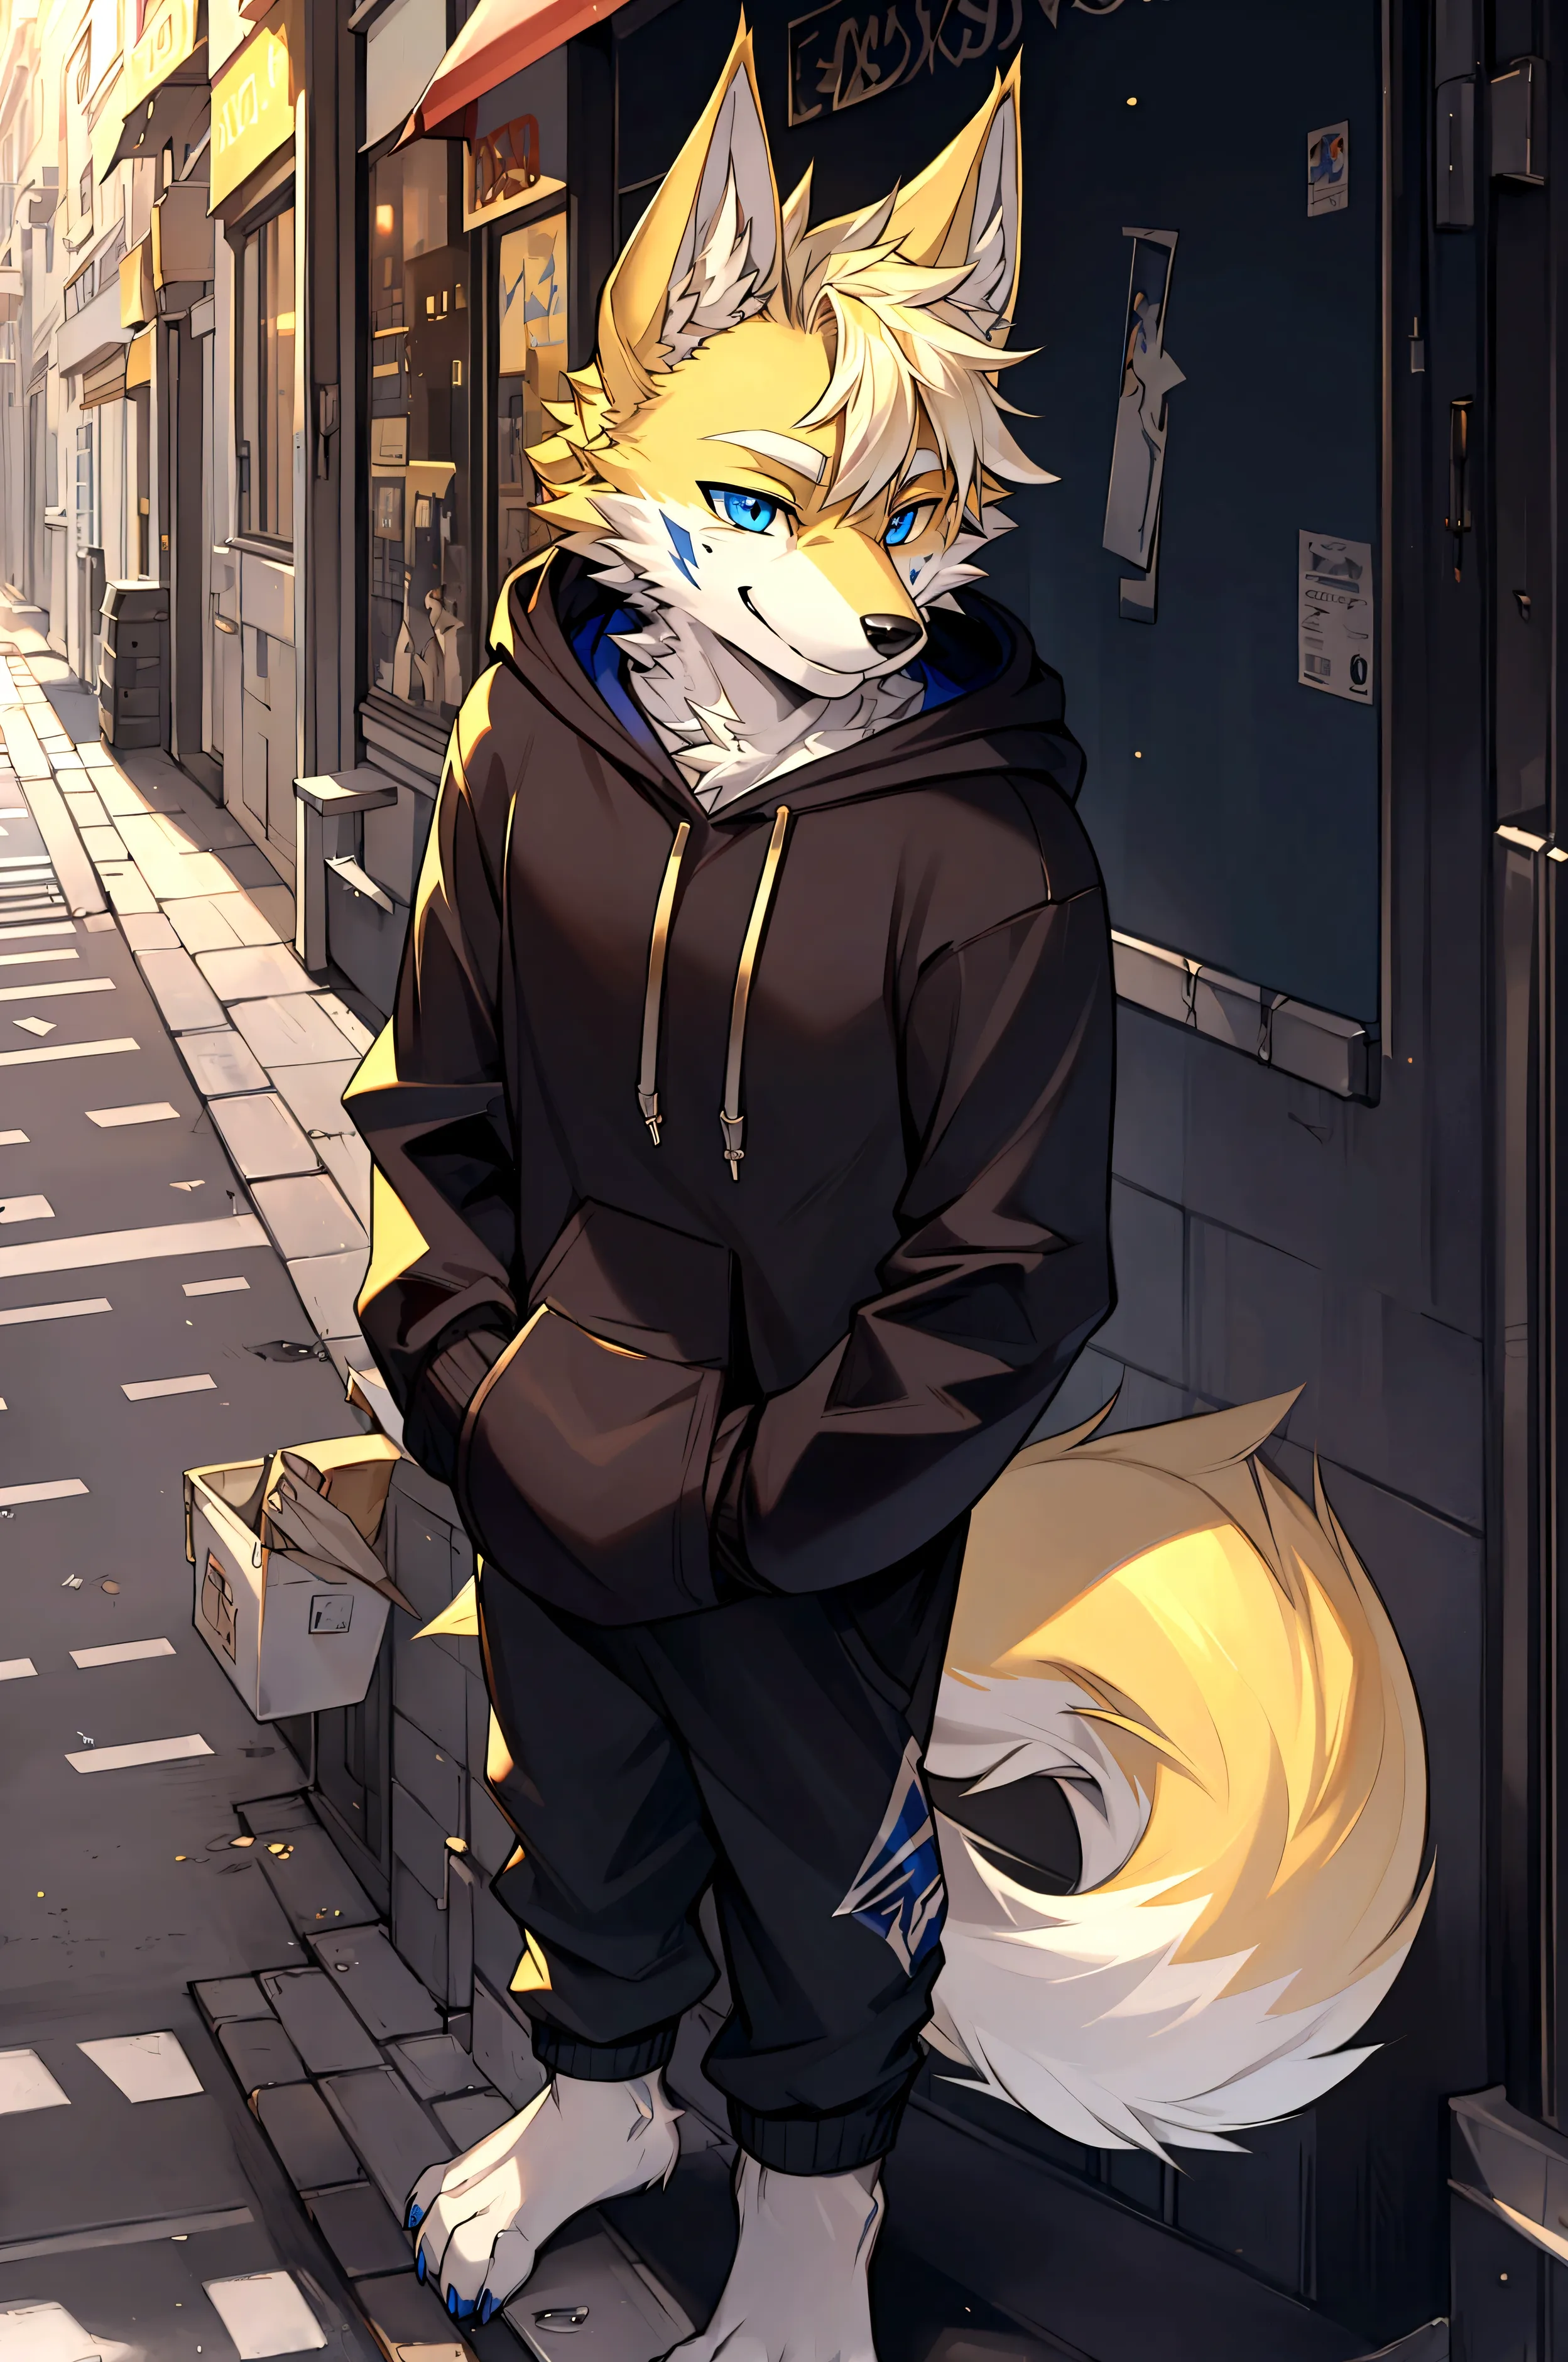 masterpiece,High quality,furry,male,(wolf),(yellow fur),(hoodie),blue eye,In the street,perfect background,Scar on the face,Smil...